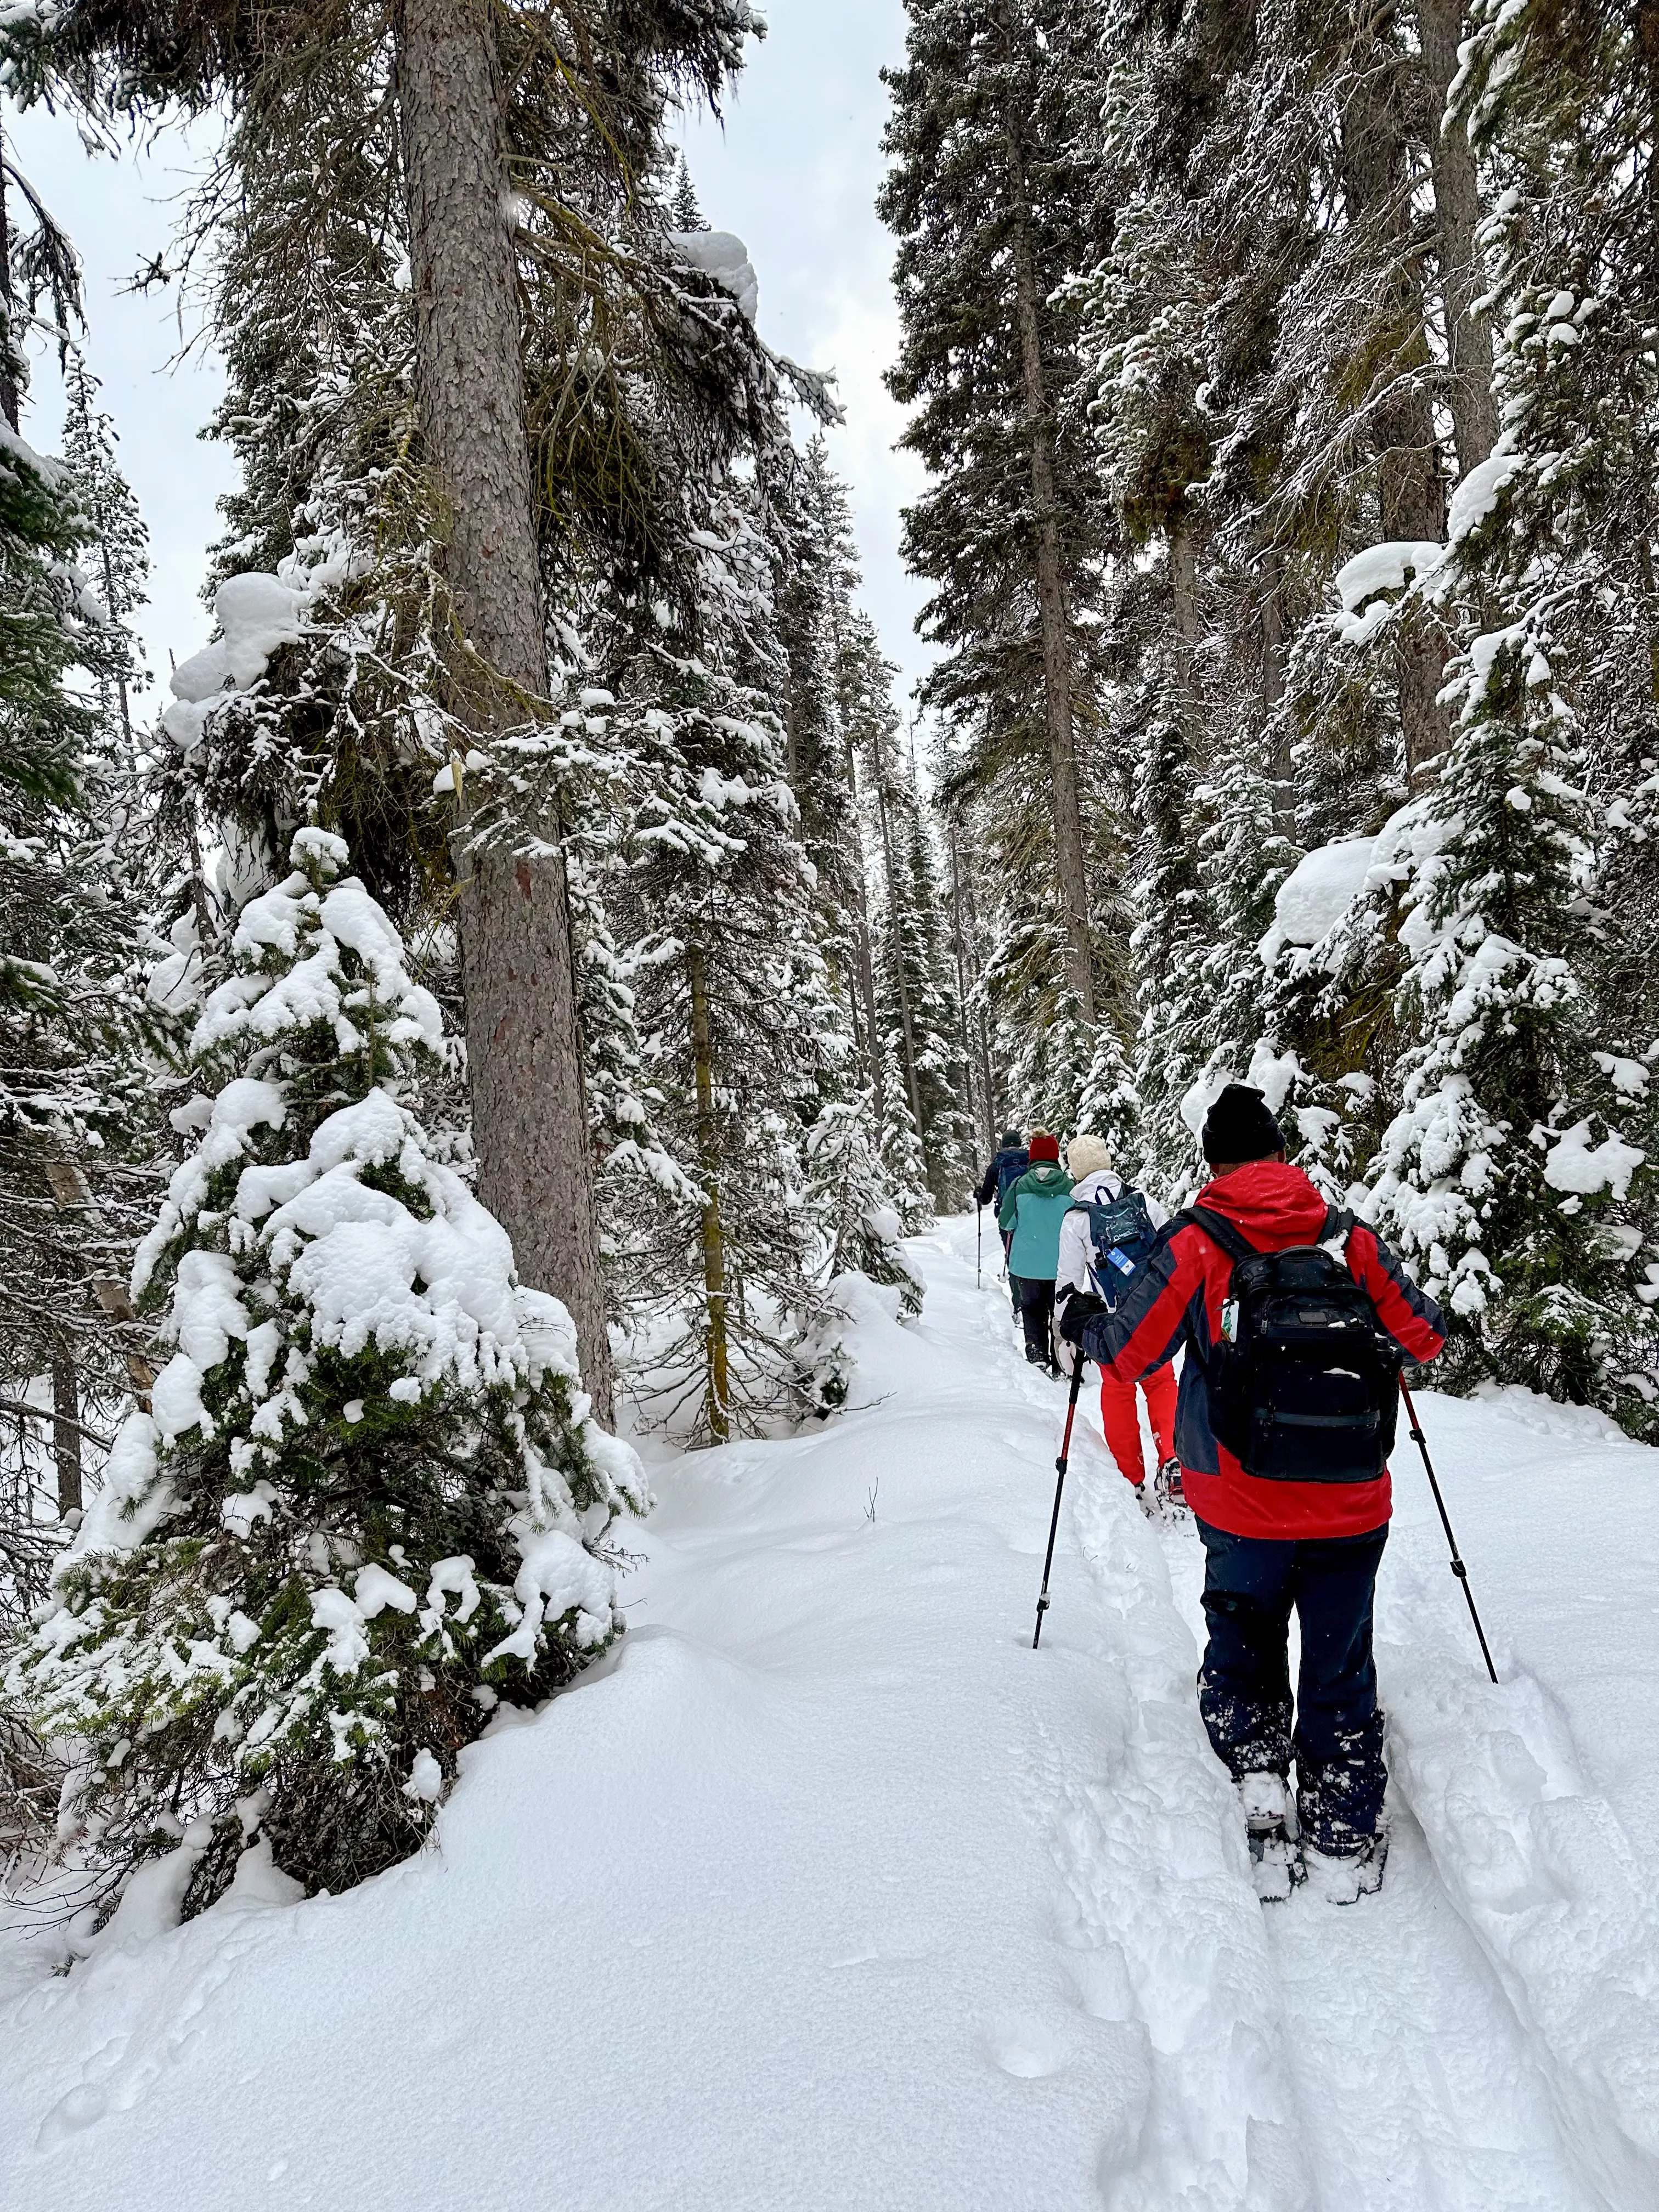 People in snowshoes walk through a narrow tree lined path